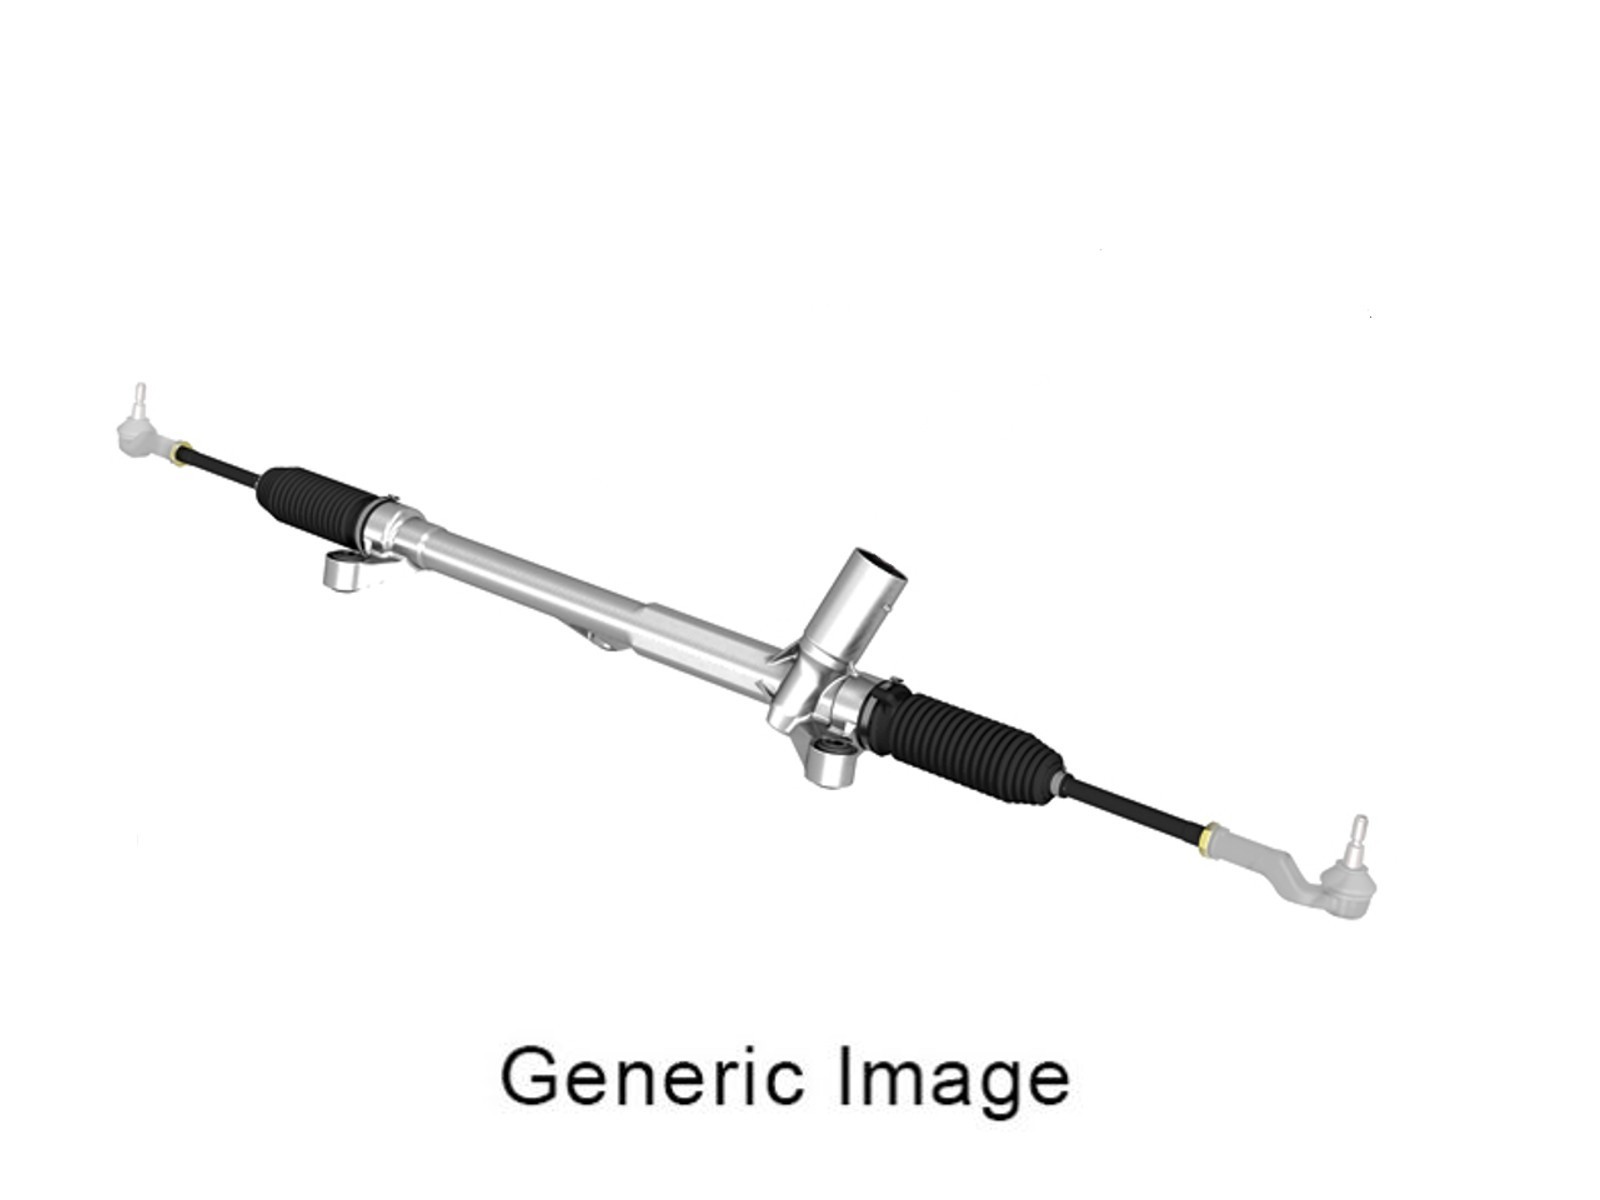 Rack and Pinion Steering System Diagram Rack and Pinion Power Steering Diagram Renault Megane Mk2 Steering Of Rack and Pinion Steering System Diagram